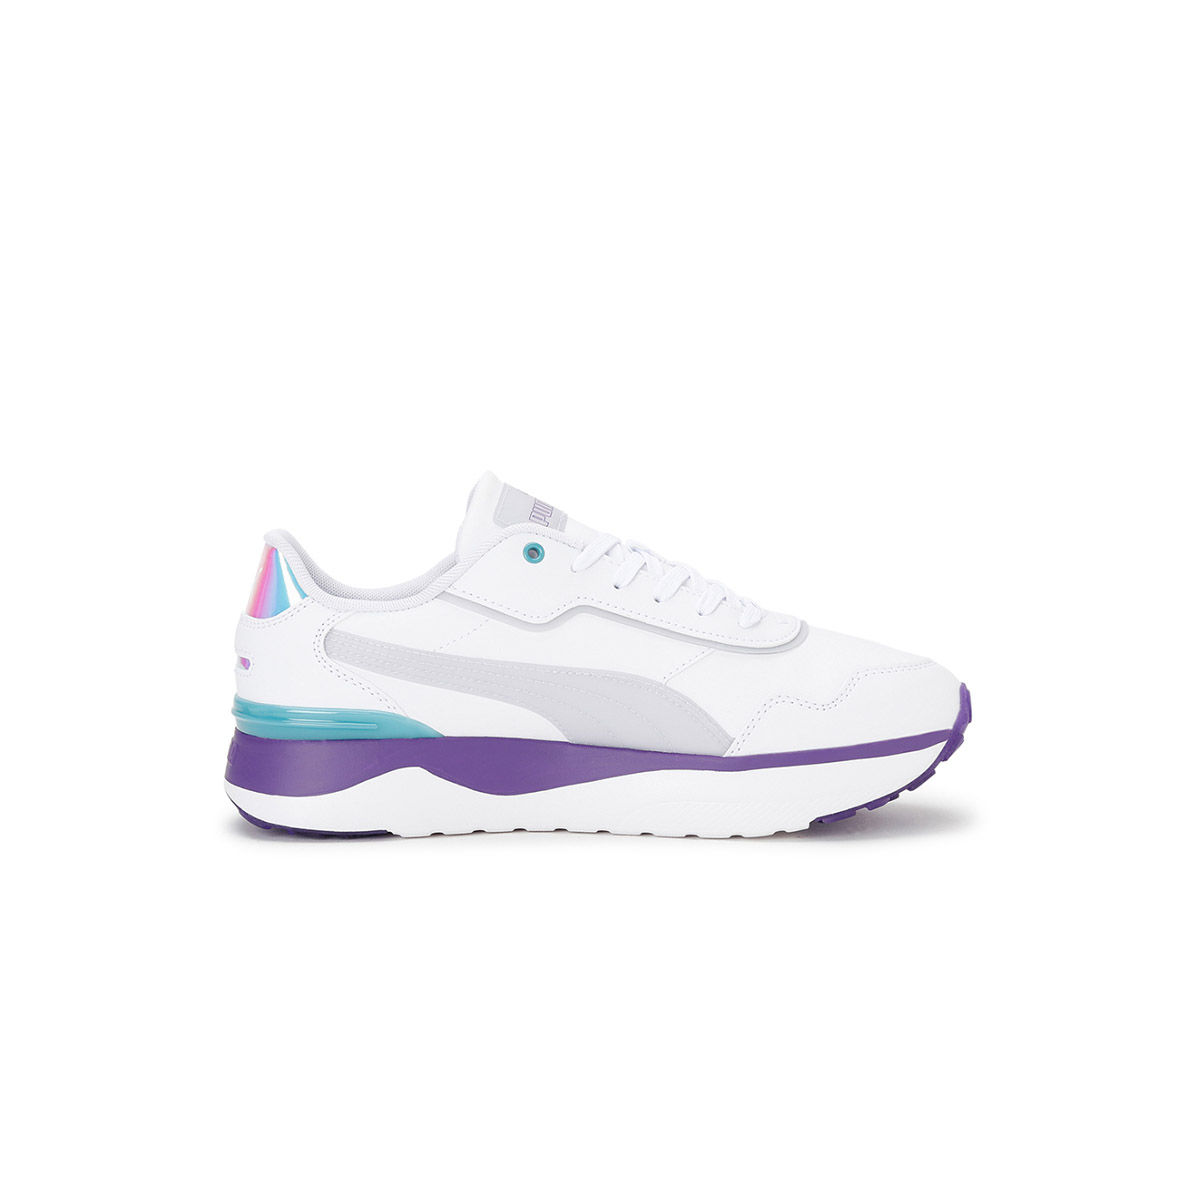 Puma R78 Voyage Candy White Casual Sneakers: Buy Puma R78 Voyage Candy ...